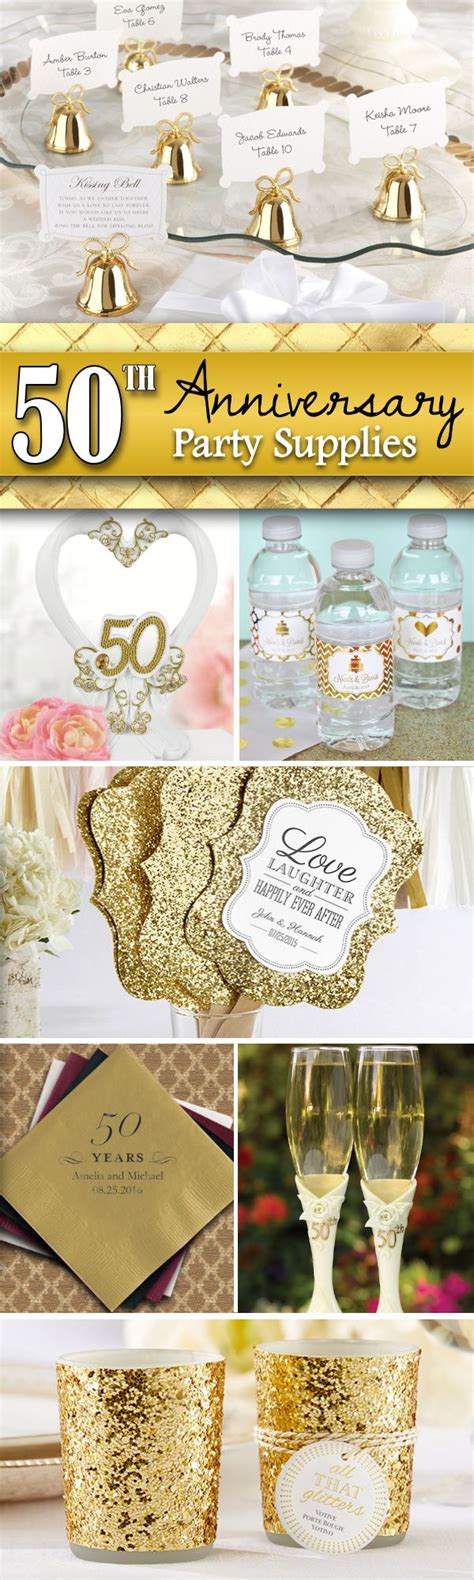 50th Anniversary Party Ideas